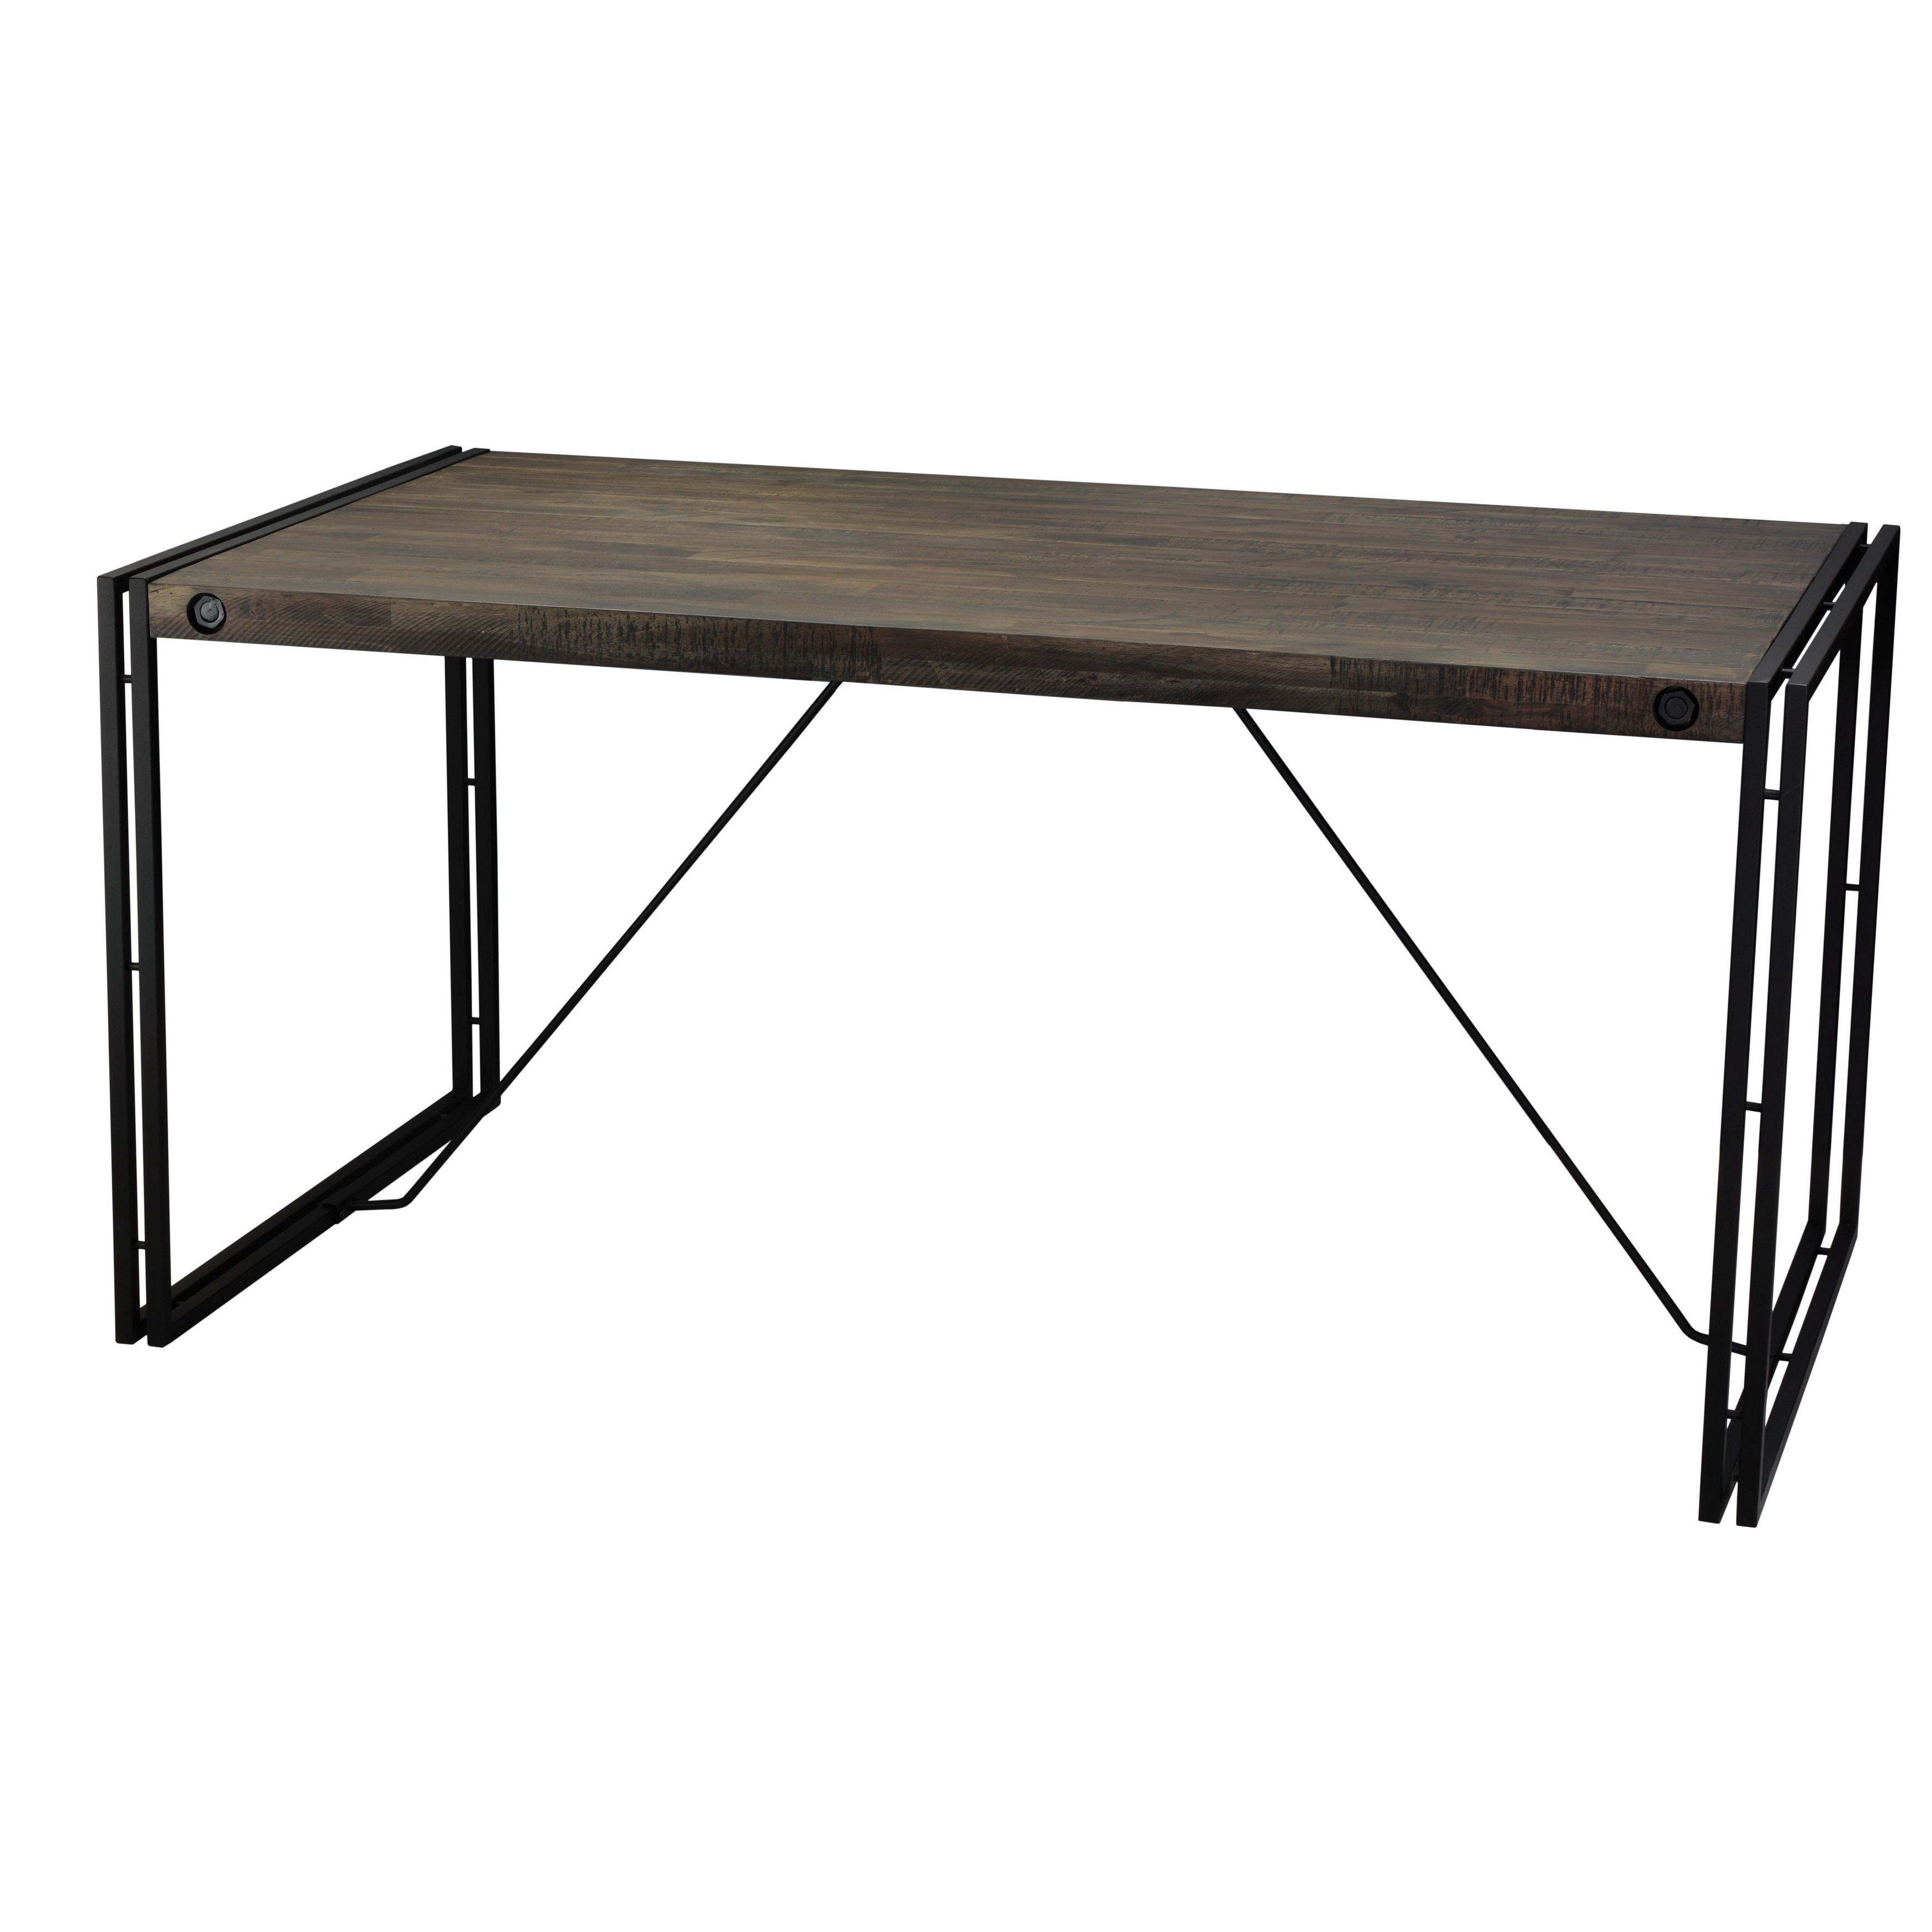 Fashionable Dining Tables With Metal Legs Wood Top With Regard To Shop Cortesi Home Thayer Wood Top Dining Table With Metal Legs (View 8 of 25)